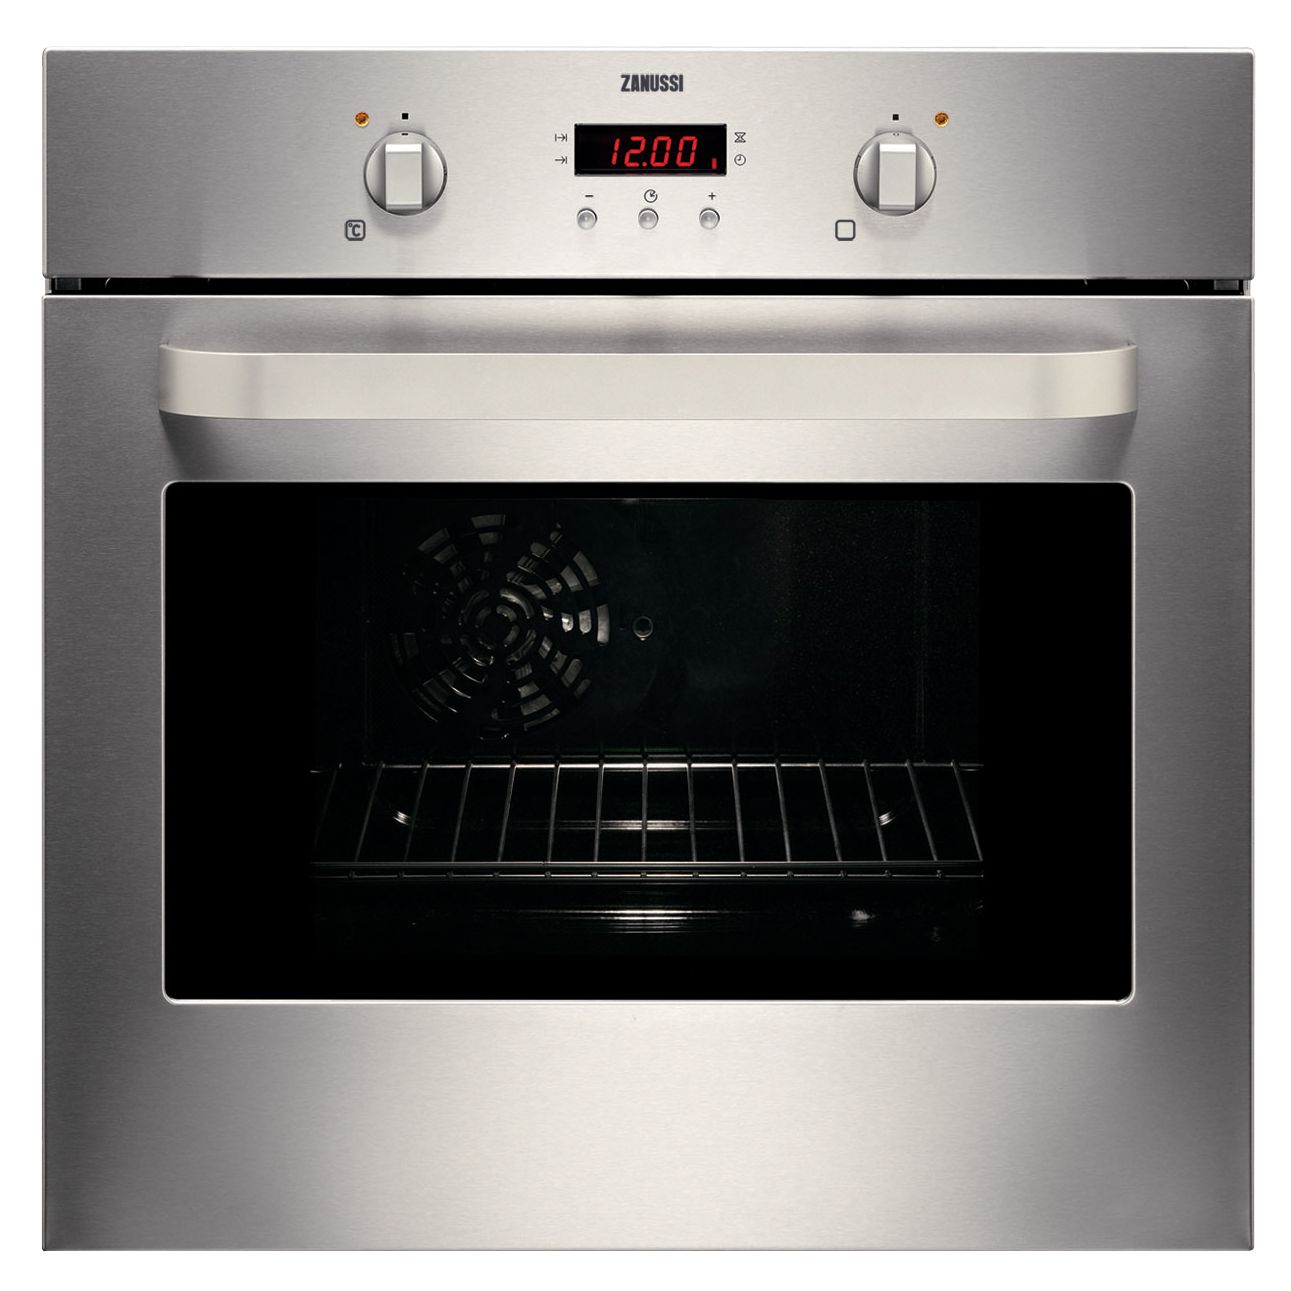 Zanussi ZOB330X Single Electric Oven, Stainless Steel at John Lewis